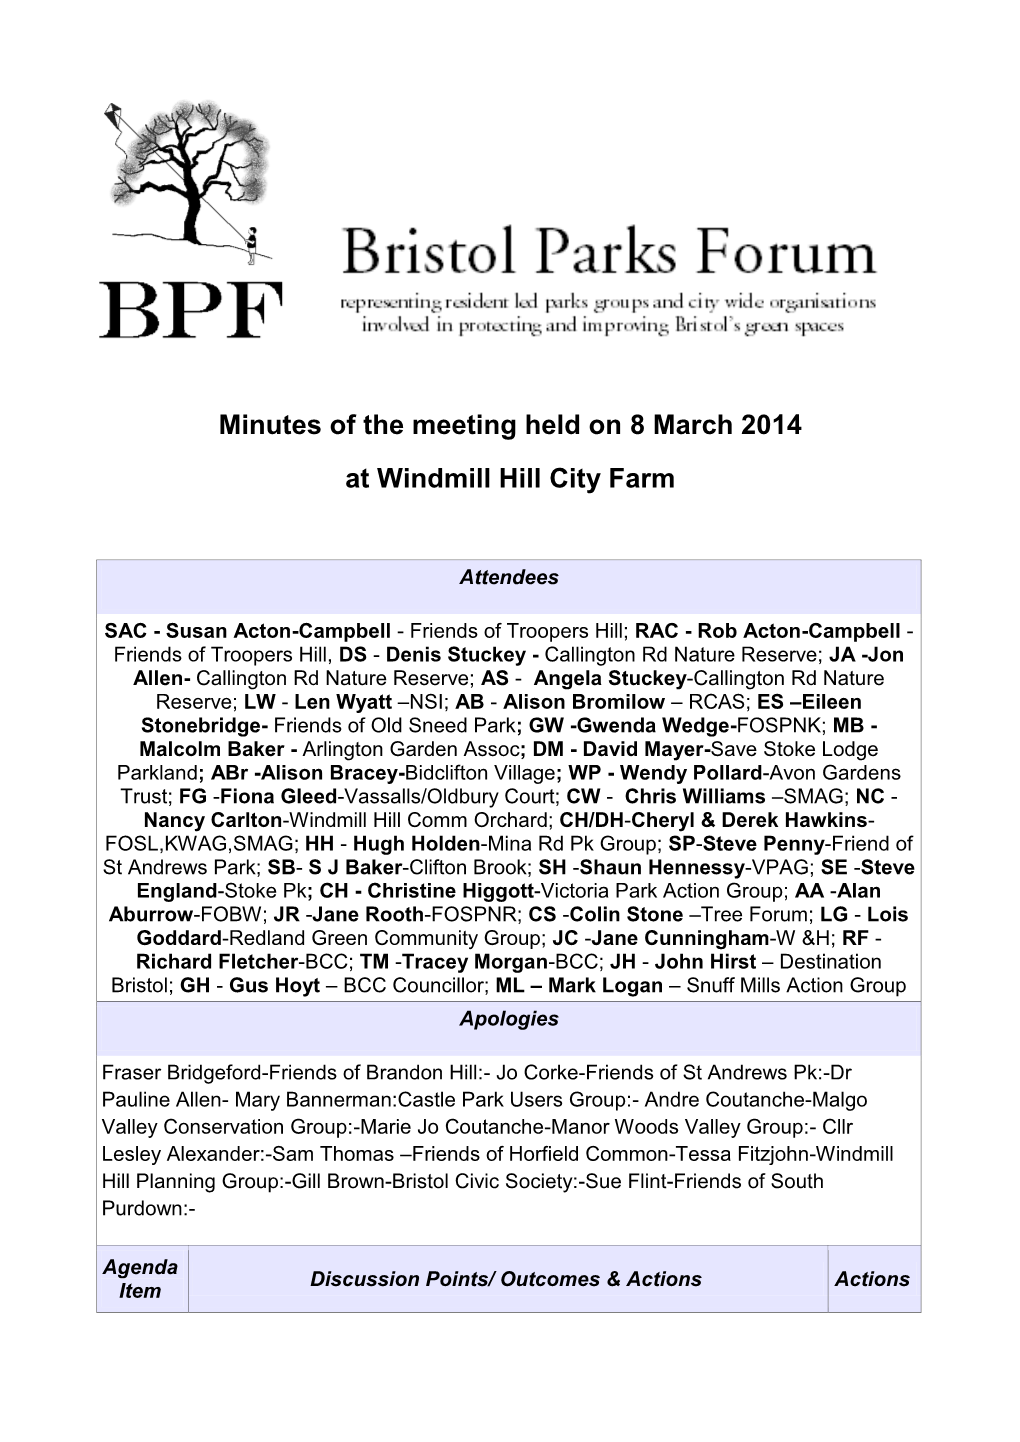 Minutes of the Meeting Held on 8 March 2014 at Windmill Hill City